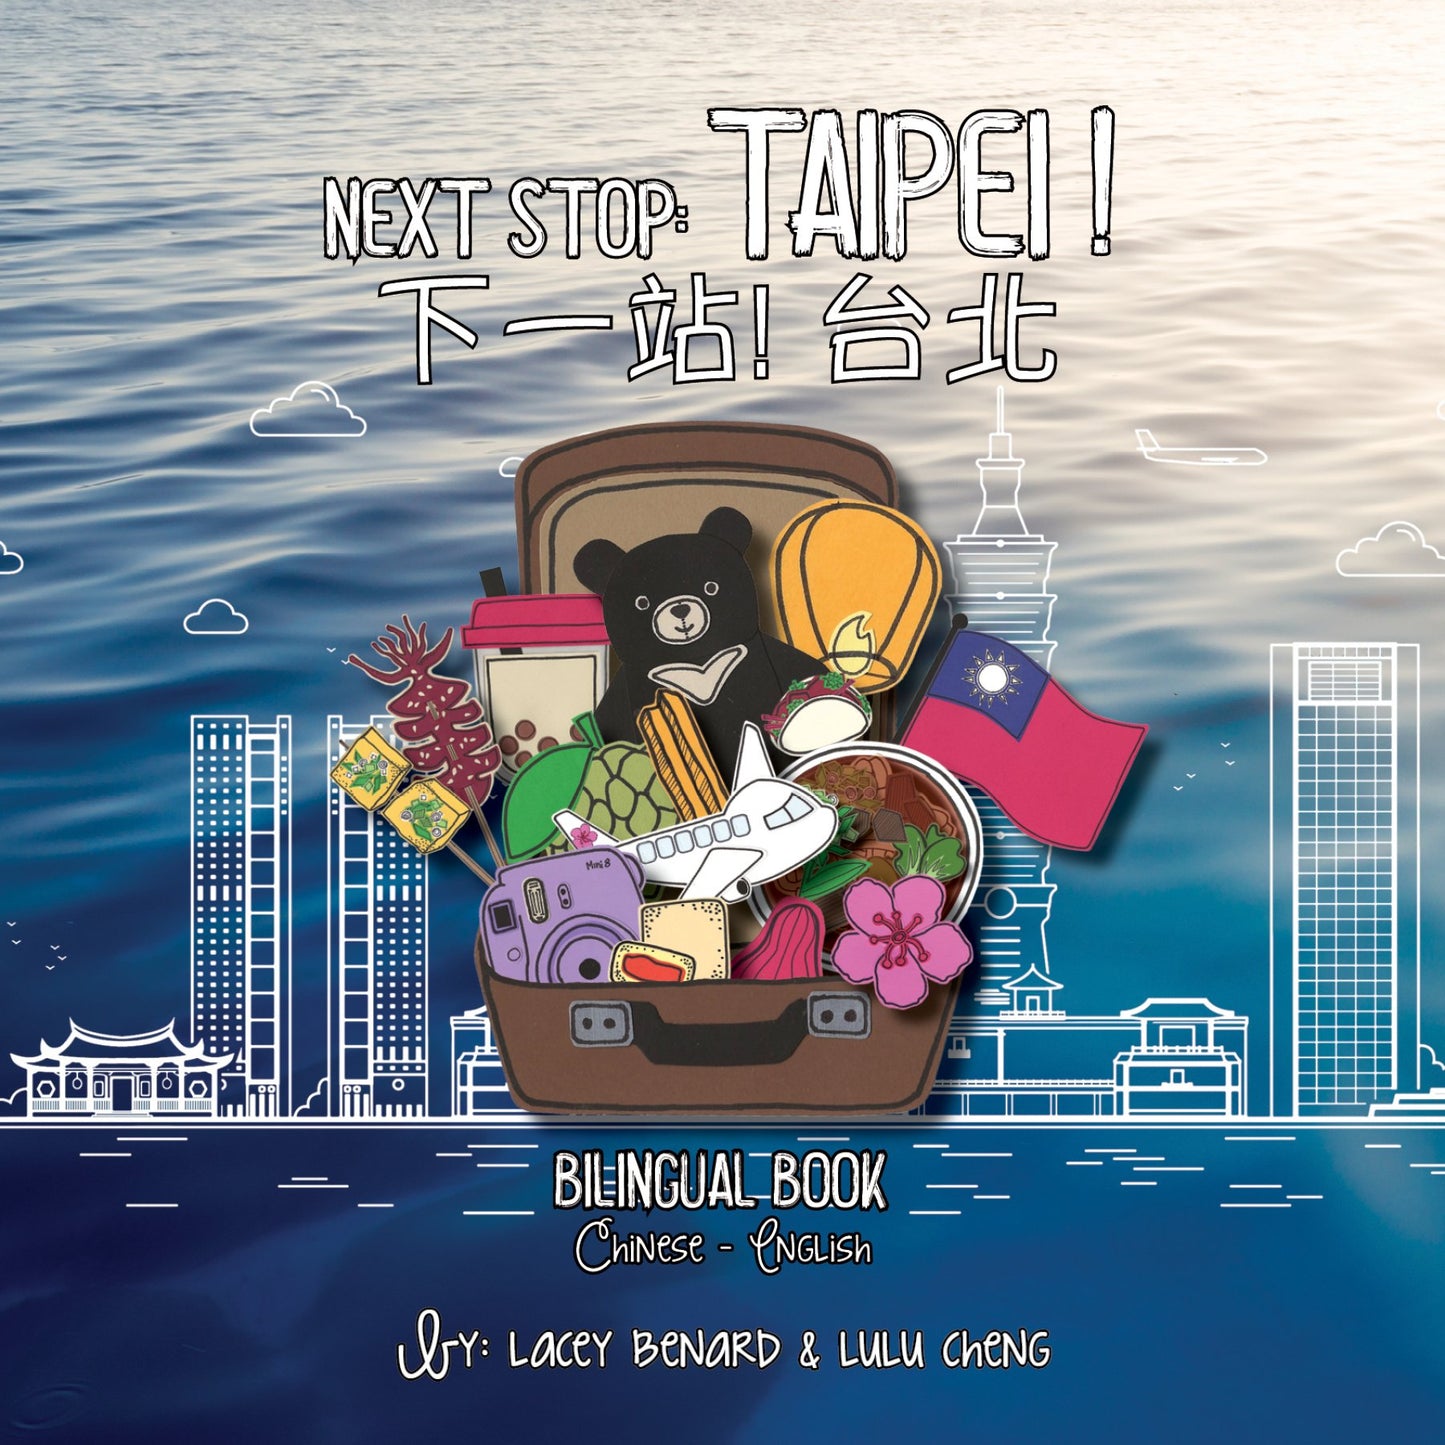 Next Stop: Taipei! 下一站! 台北, is a bilingual board book in the Bitty Bao Taiwan series, by Lacey Benard and Lulu Cheng, written in English, traditional Chinese, with pinyin and zhuyin.